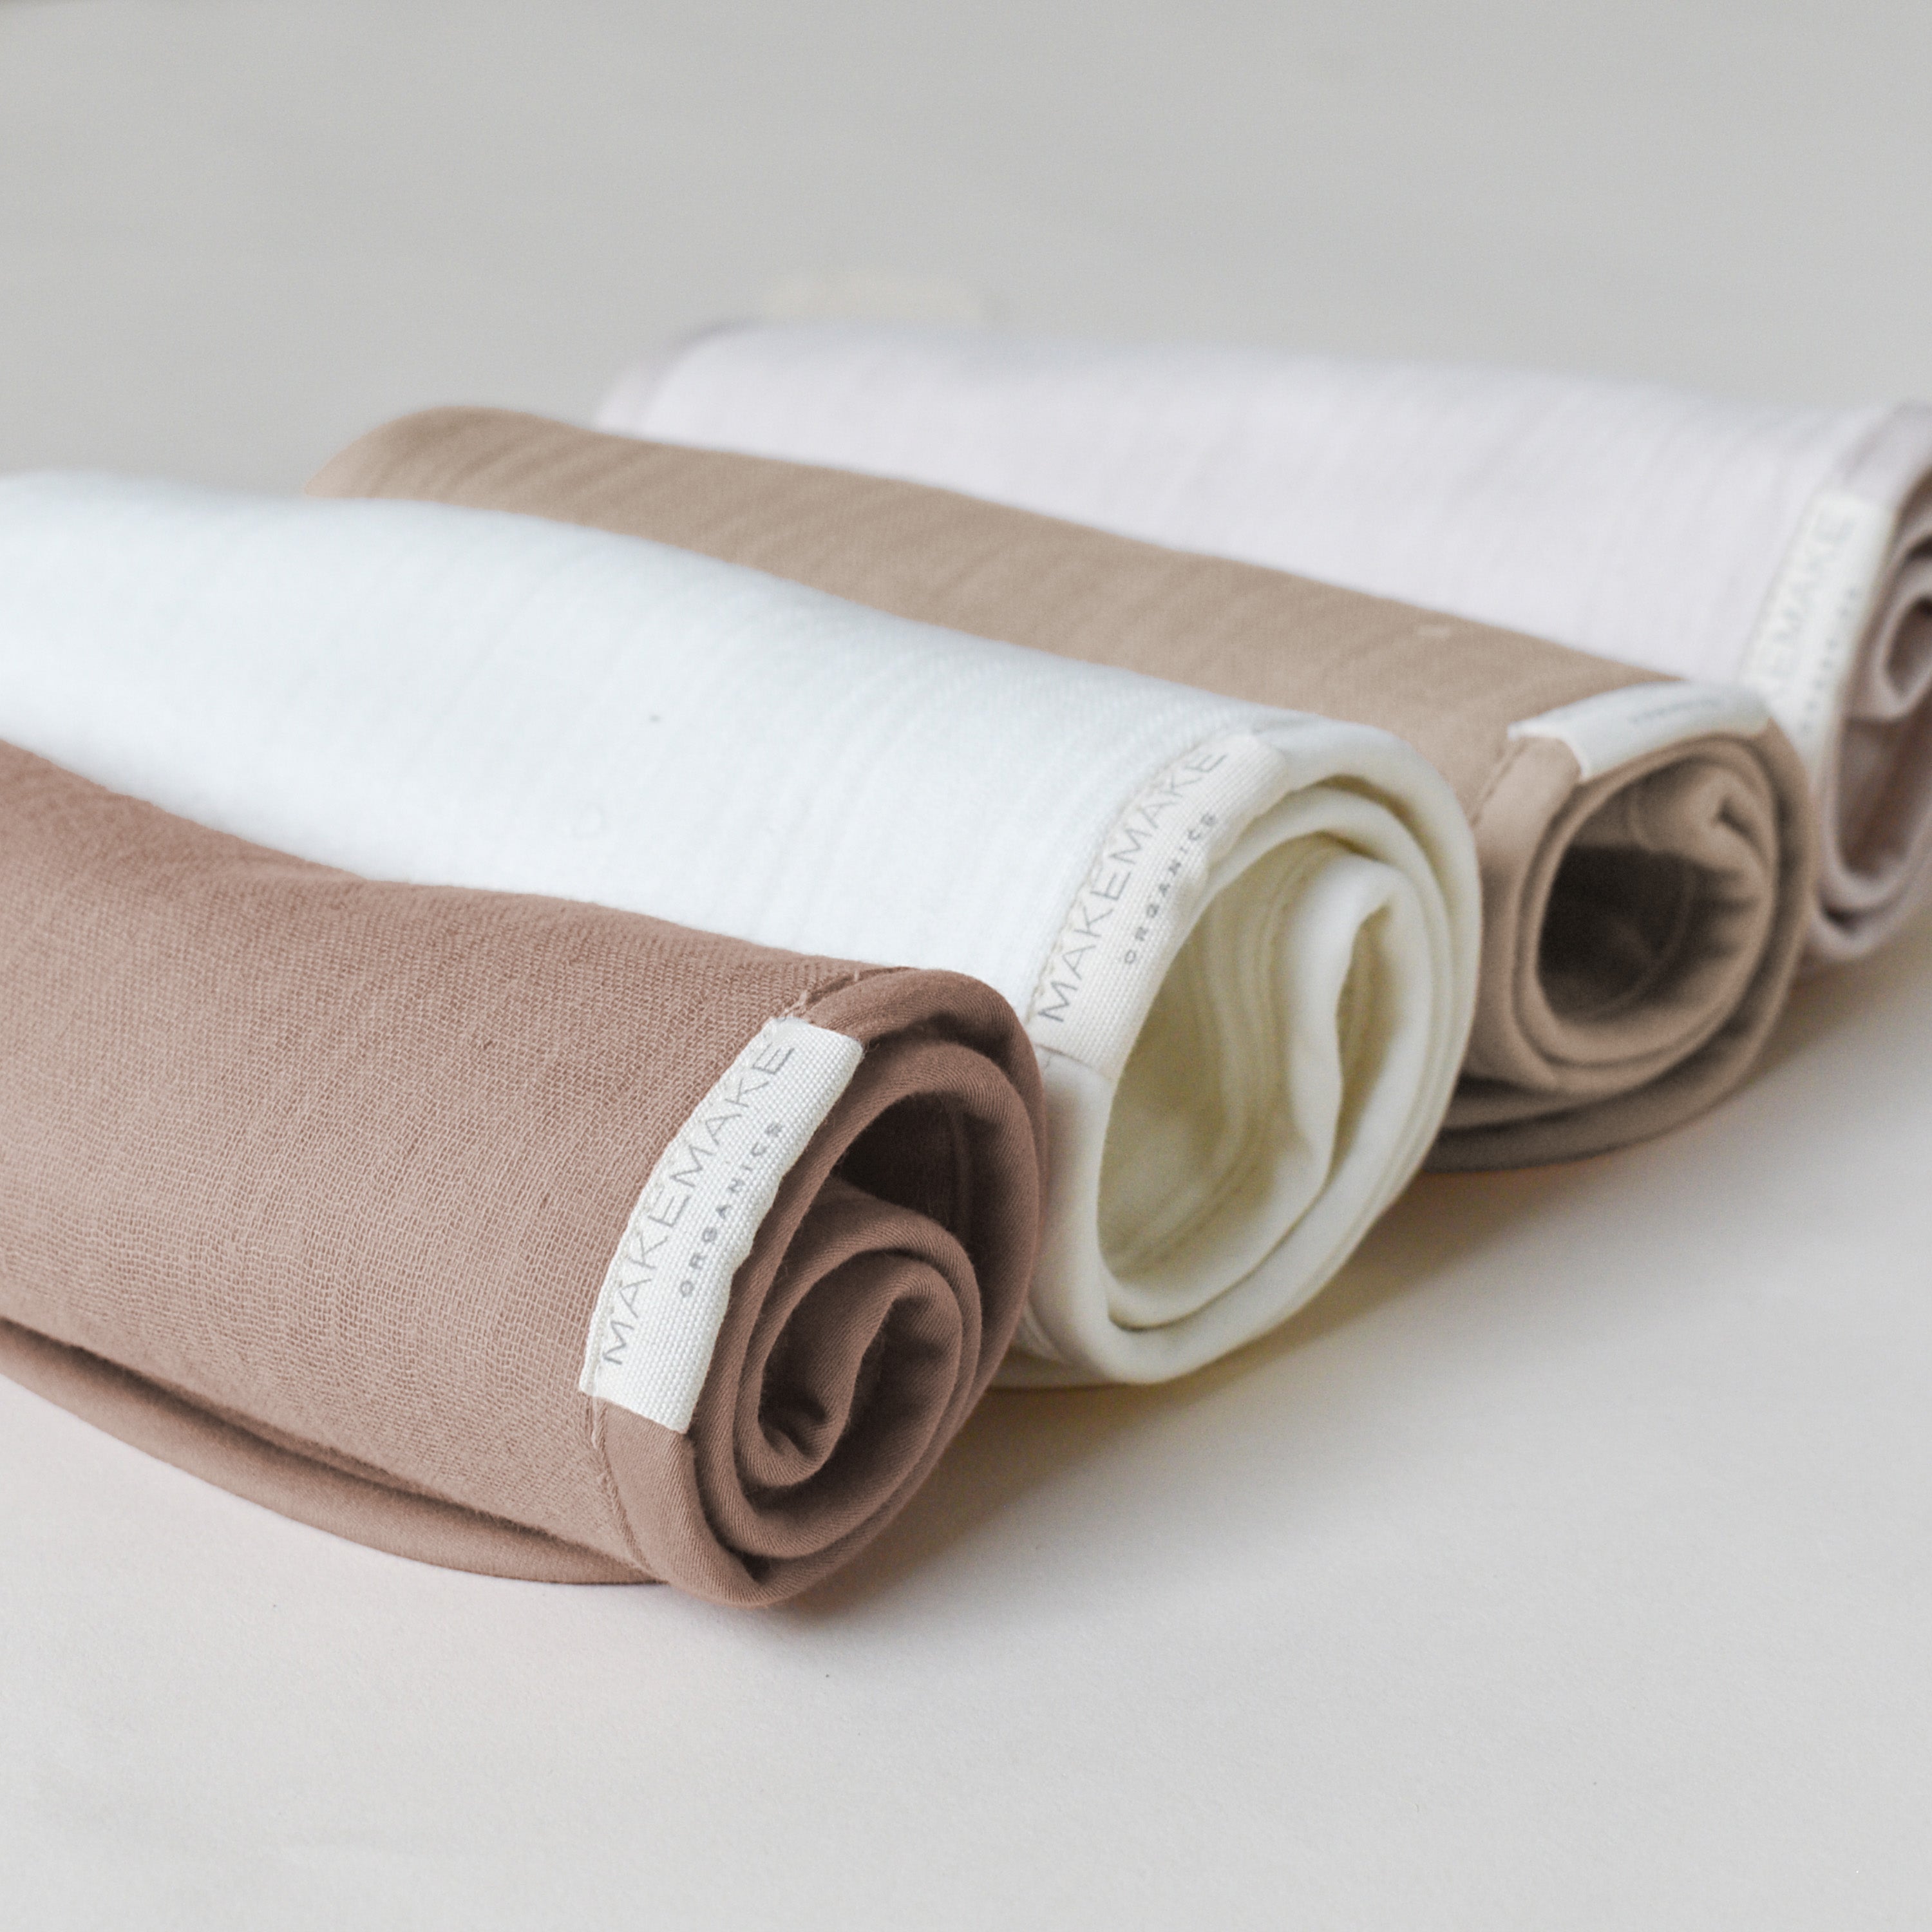 Three rolled fabrics in white, tan, and brown on a neutral background, each labeled with the brand "Makemake Organics Organic Cotton Muslin Burp Cloth - Ivory & Taupe.